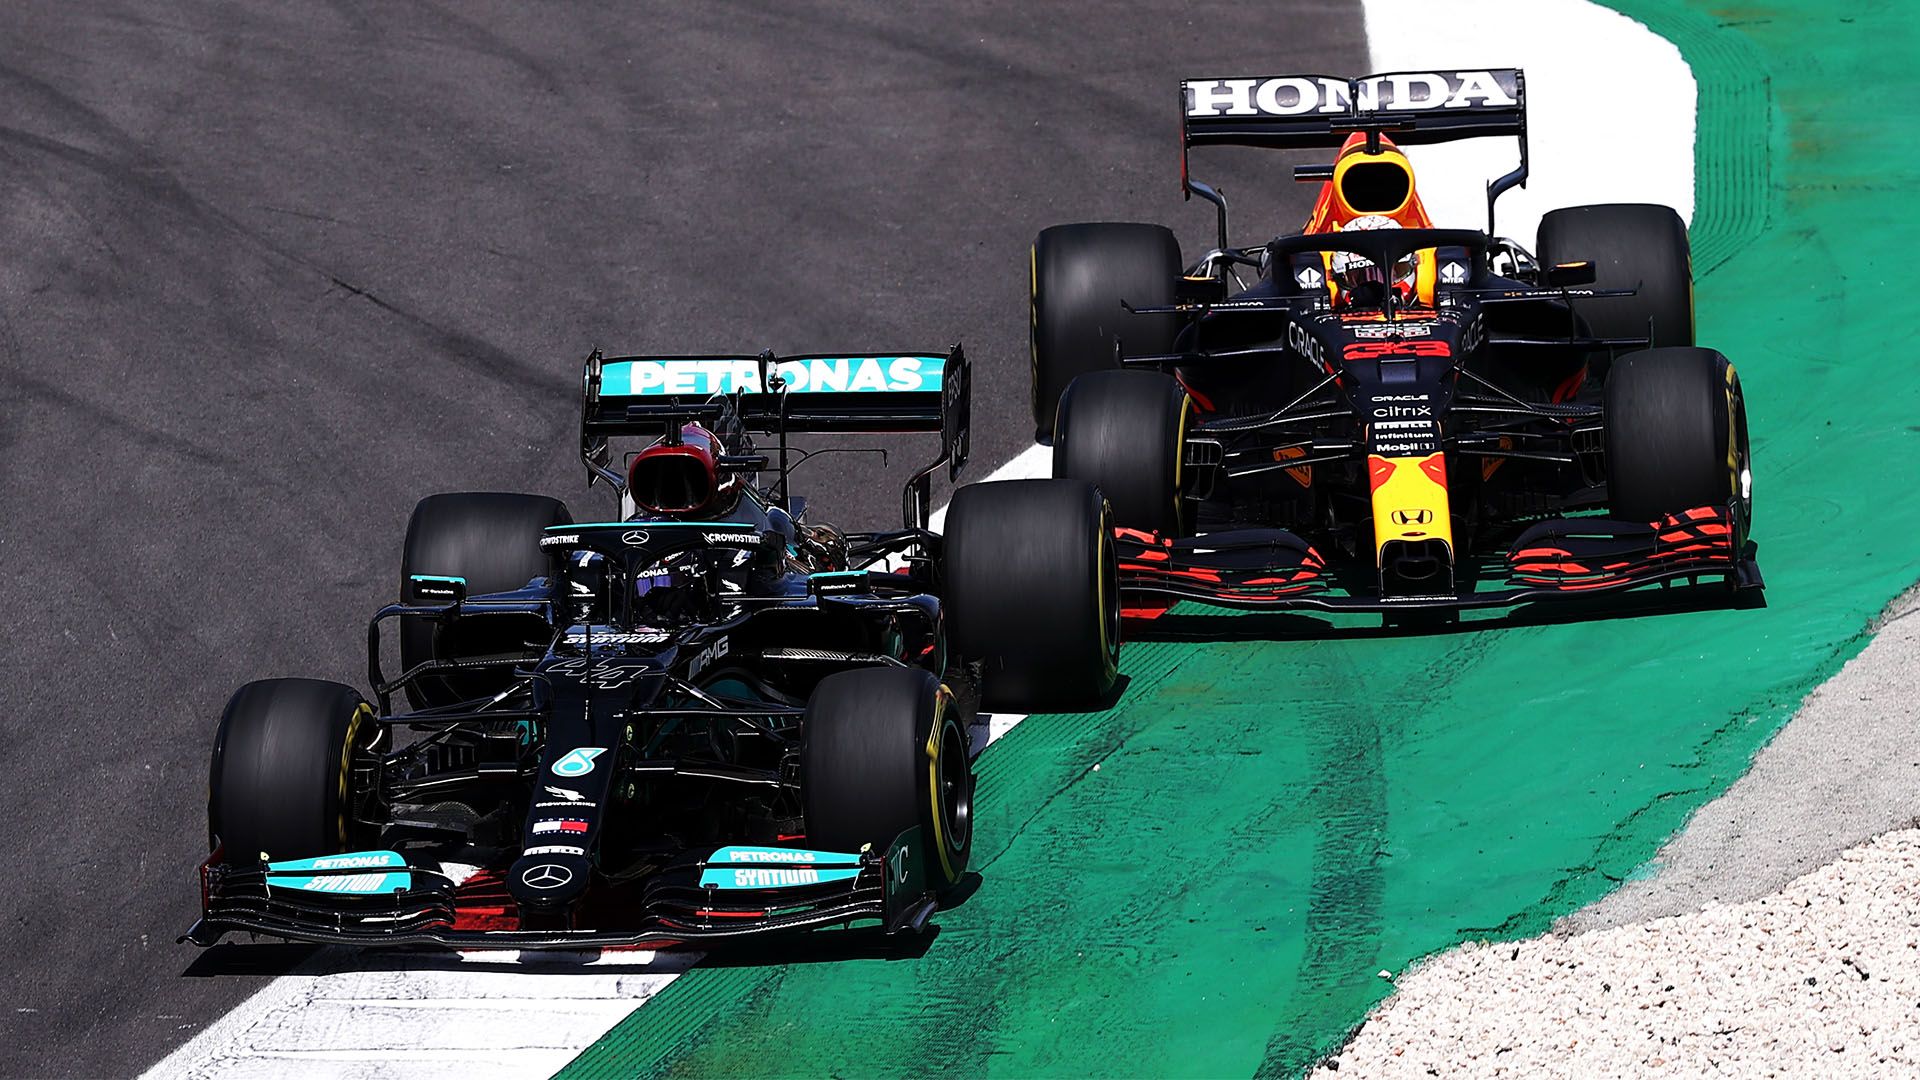 Portuguese Grand Prix race report and highlights: Hamilton takes victory in Portugal after crucial overtakes on Verstappen and Bottas. Formula 1®